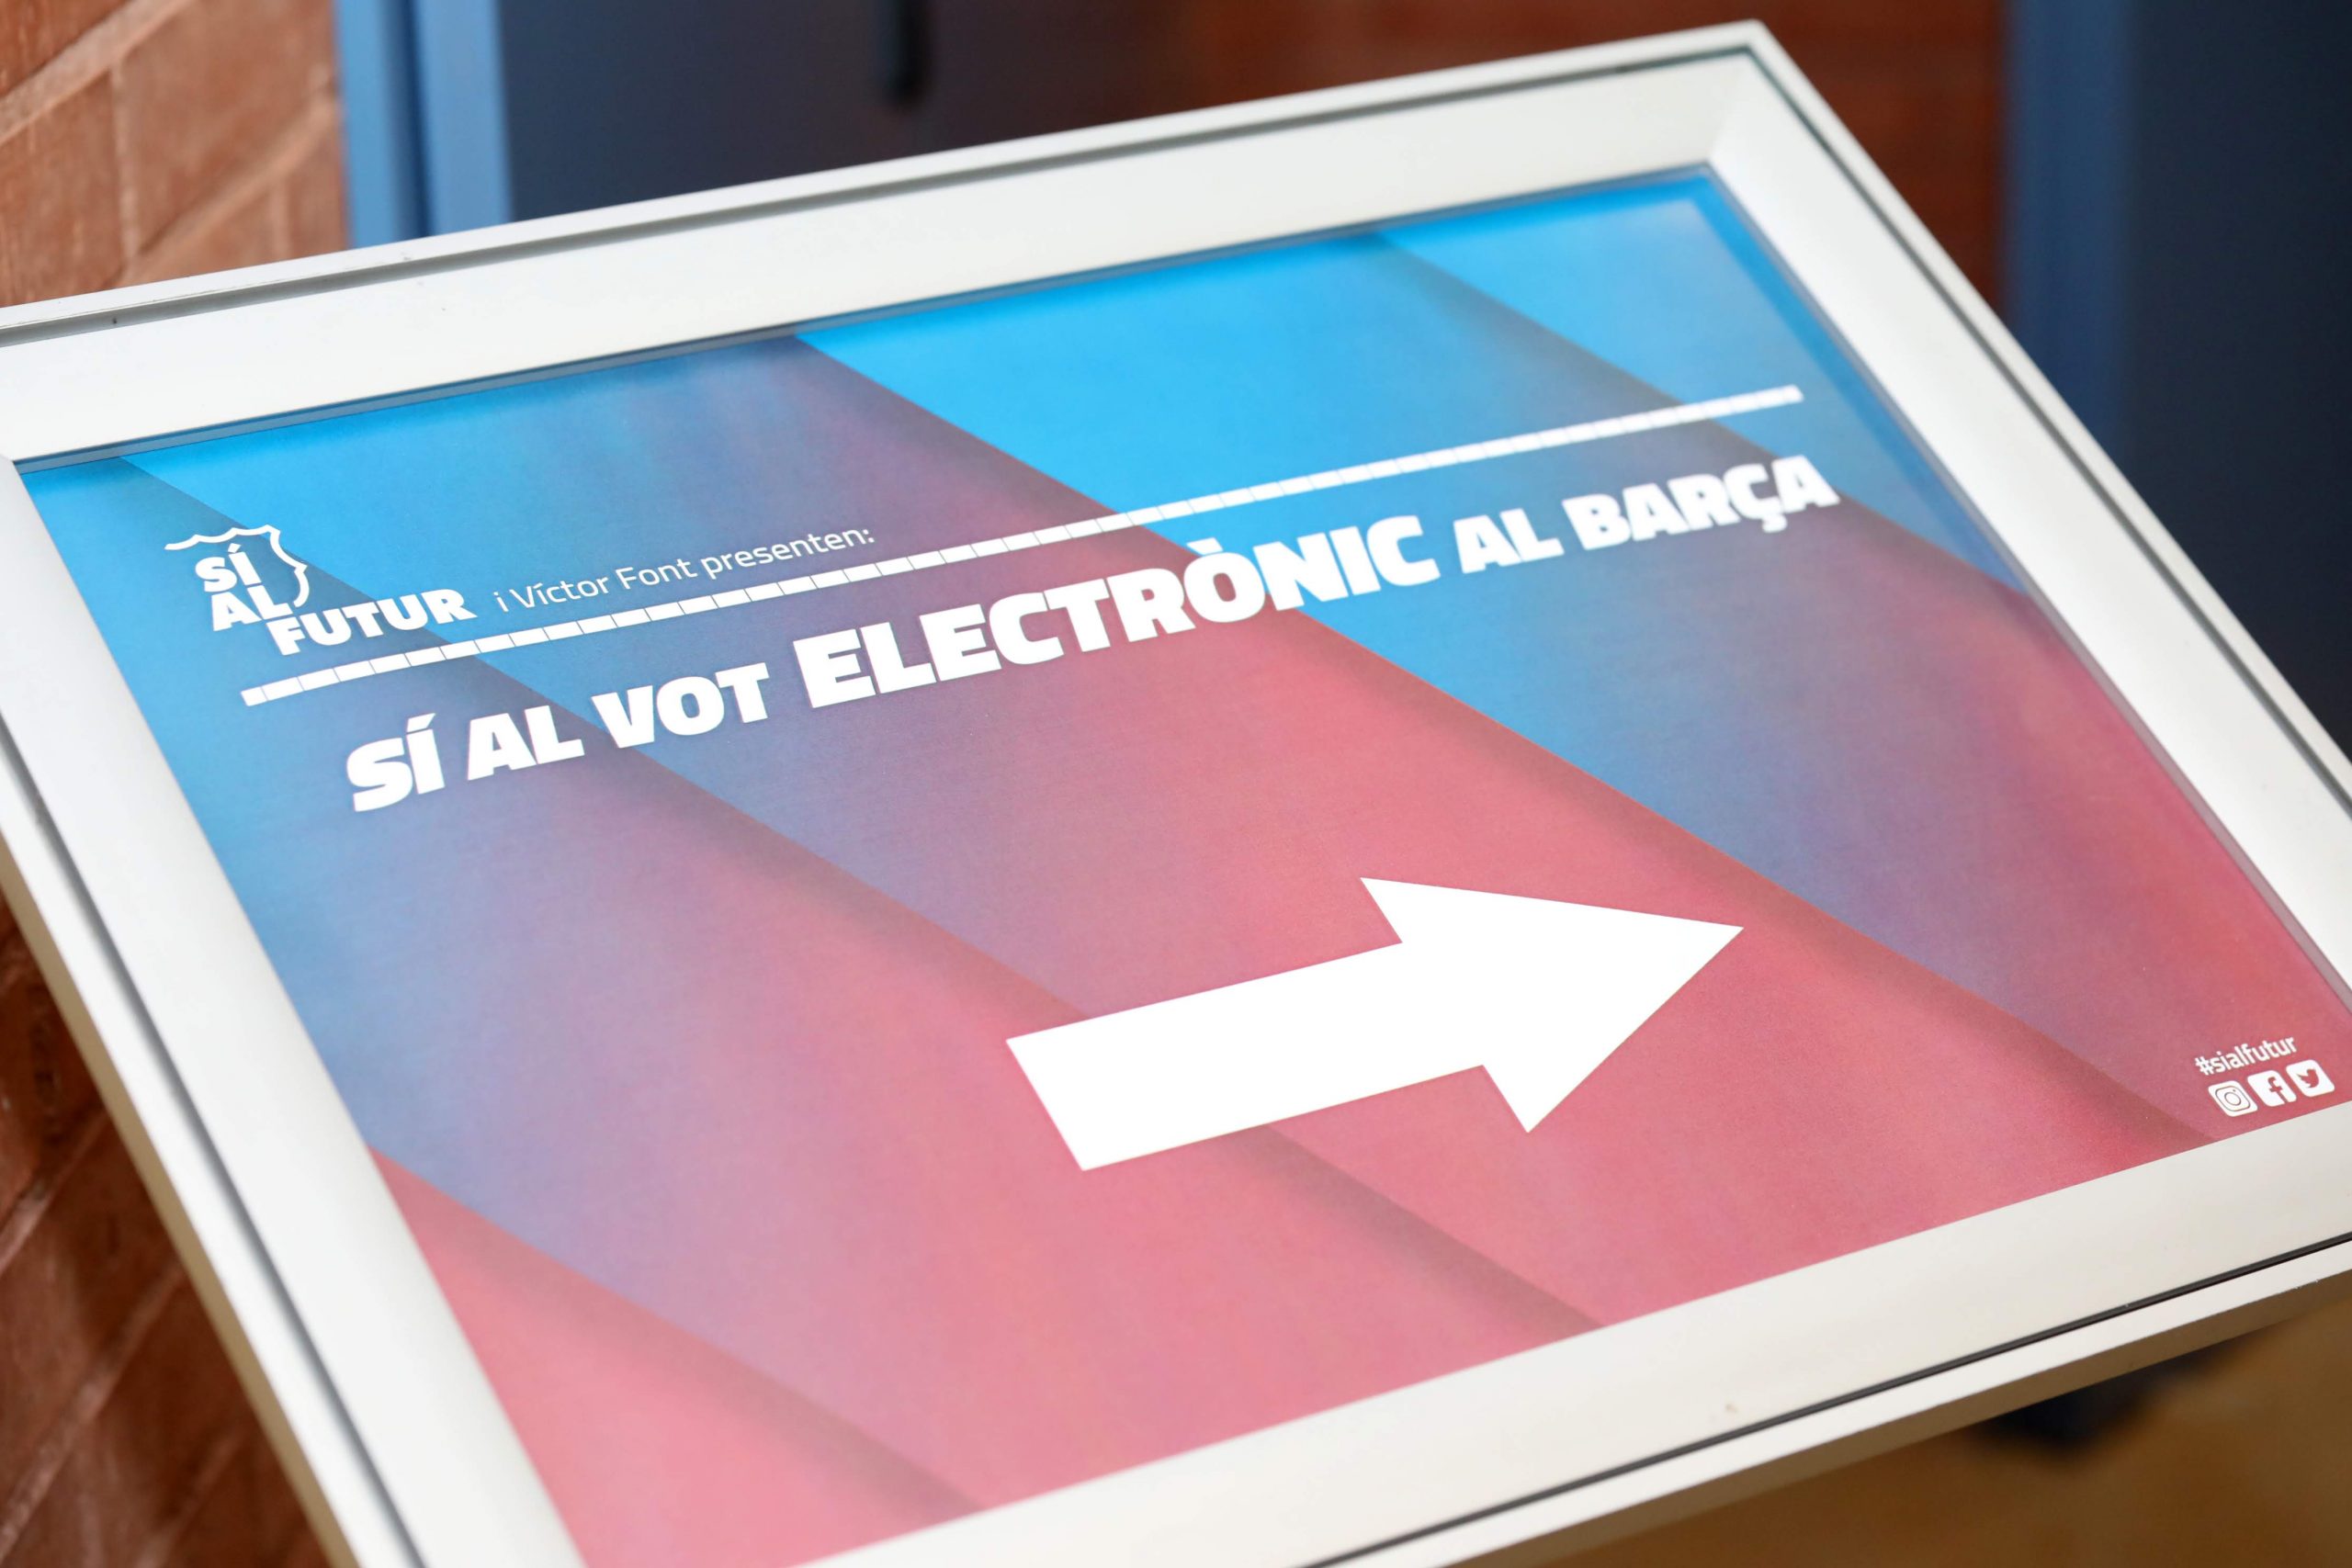 The pictures from the act about electronic voting by Sí al futur